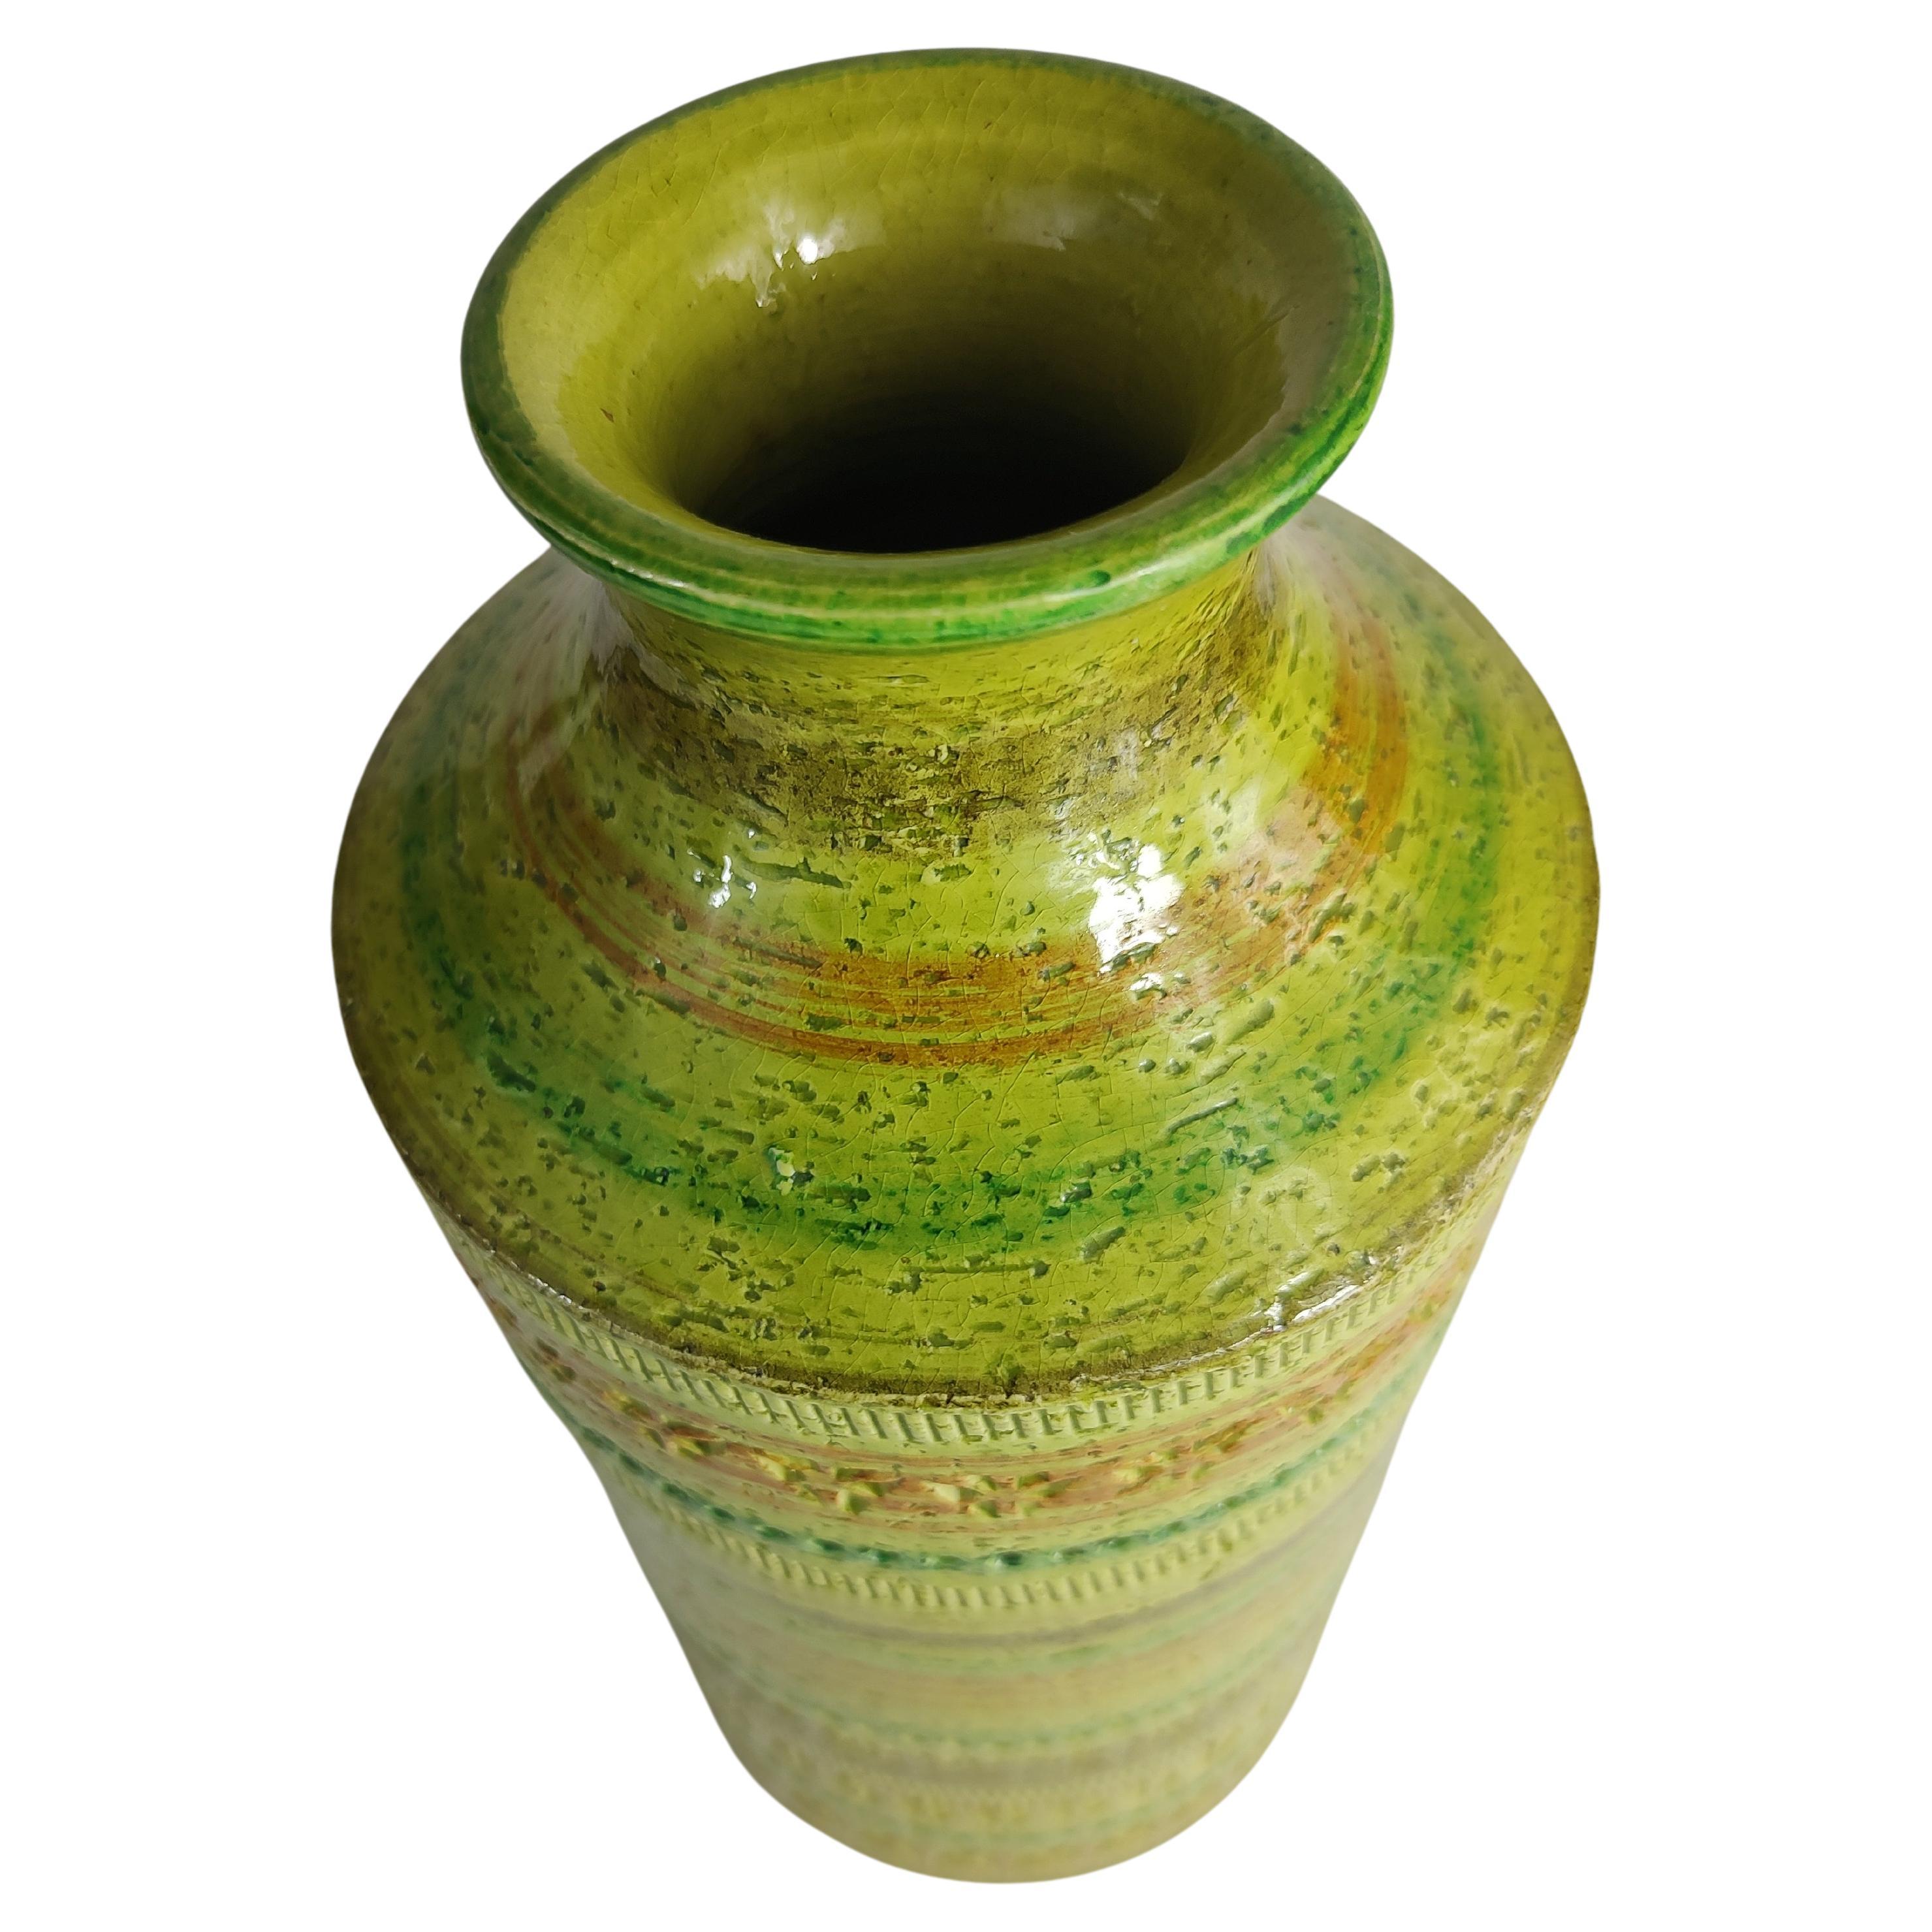 Fabulous and beautiful vase in lime green with concentric stripes in various colors with archaic impressions banding the perimeter. Aldo Londi for Bitossi vase , 12.5 x 5.5 in diameter. Fantastic crafting, amazing color! In excellent vintage